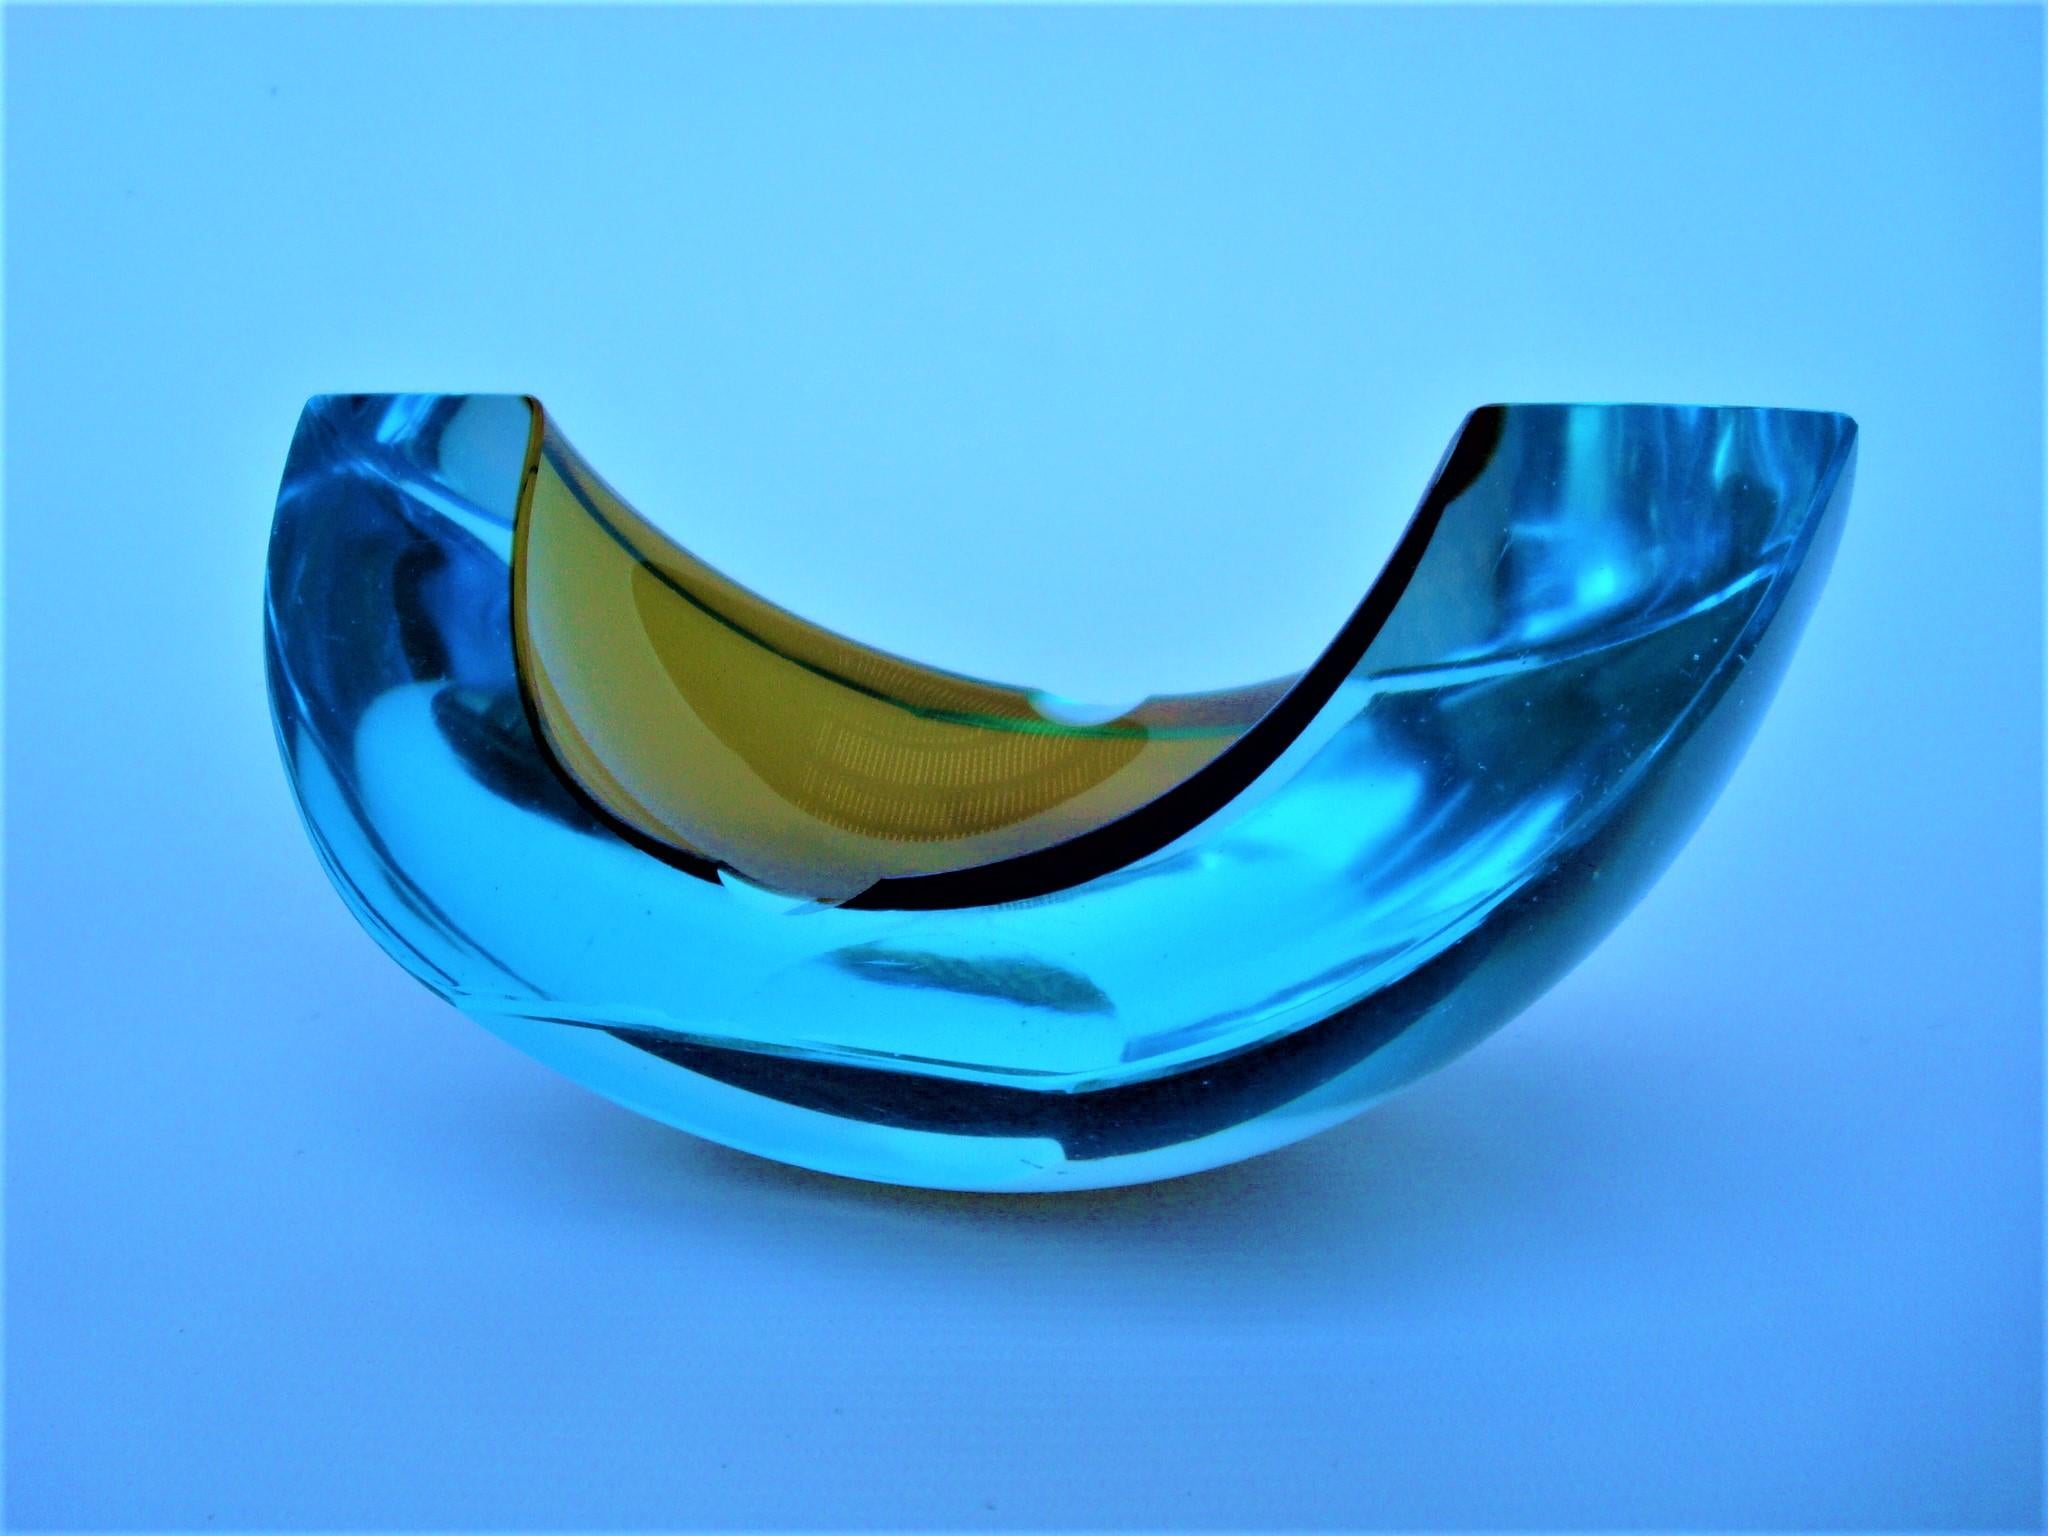 Large Cenedese Italian Sommerso Murano glass ashtray. Italy 1960´s
Utilizing the Sommerso technique this large, heavy piece of glass features an unusual design.
It looks like a seccion of a watermelon, very rare, first time i see the unusual